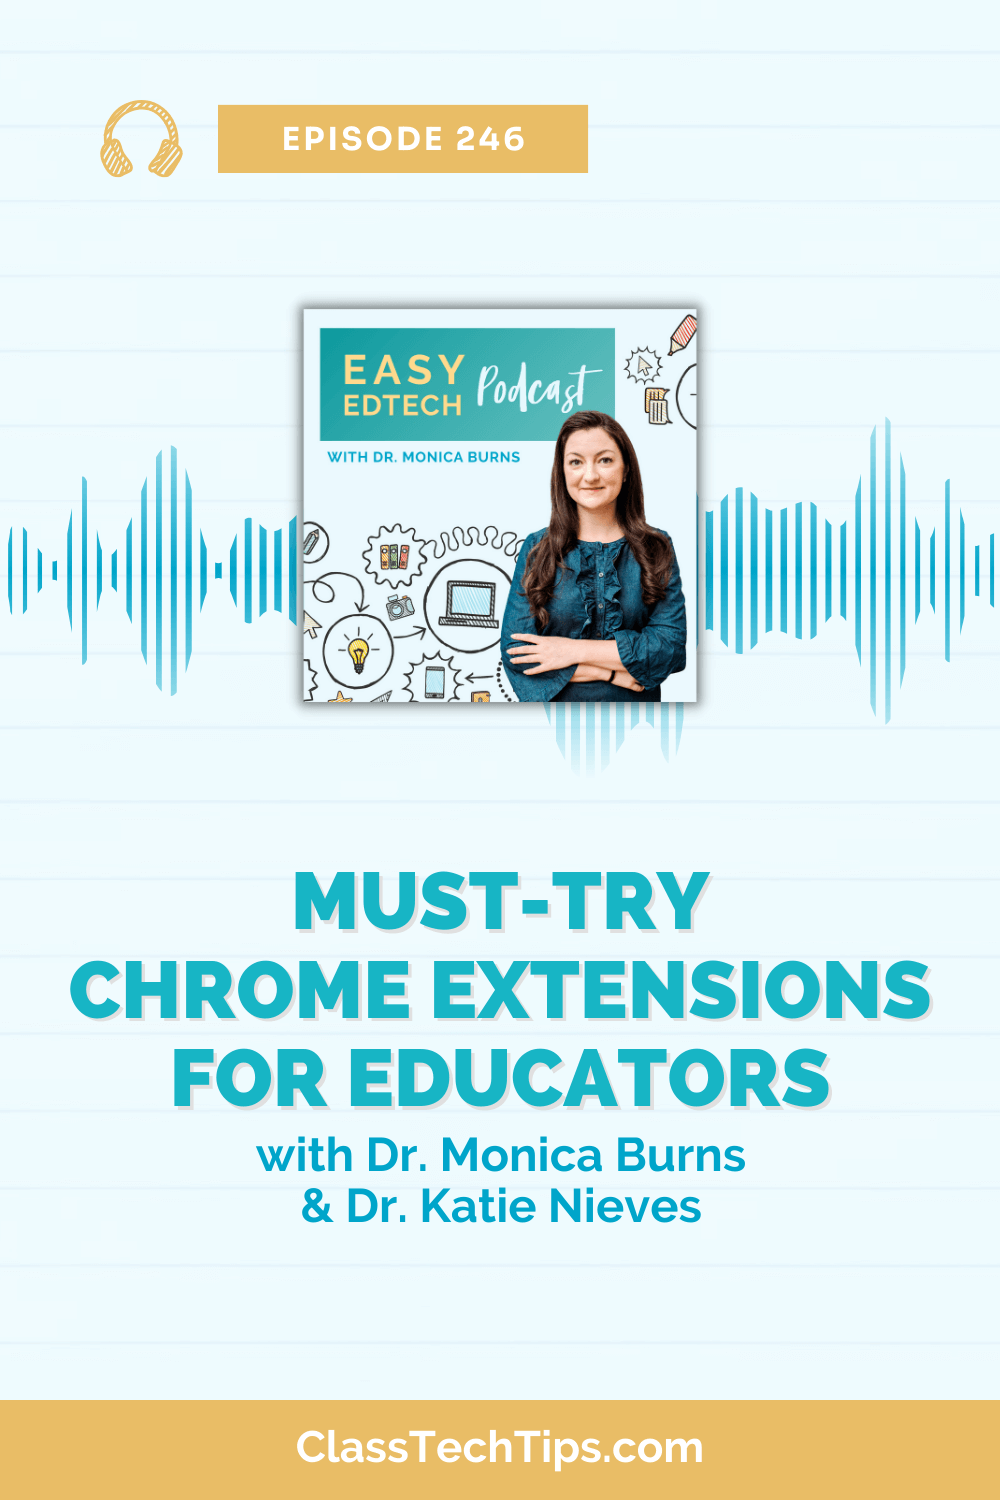 Soundwaves radiating around the podcast logo, symbolizing the dynamic discussion on Chrome extensions for educators with Dr. Katie Nieves.